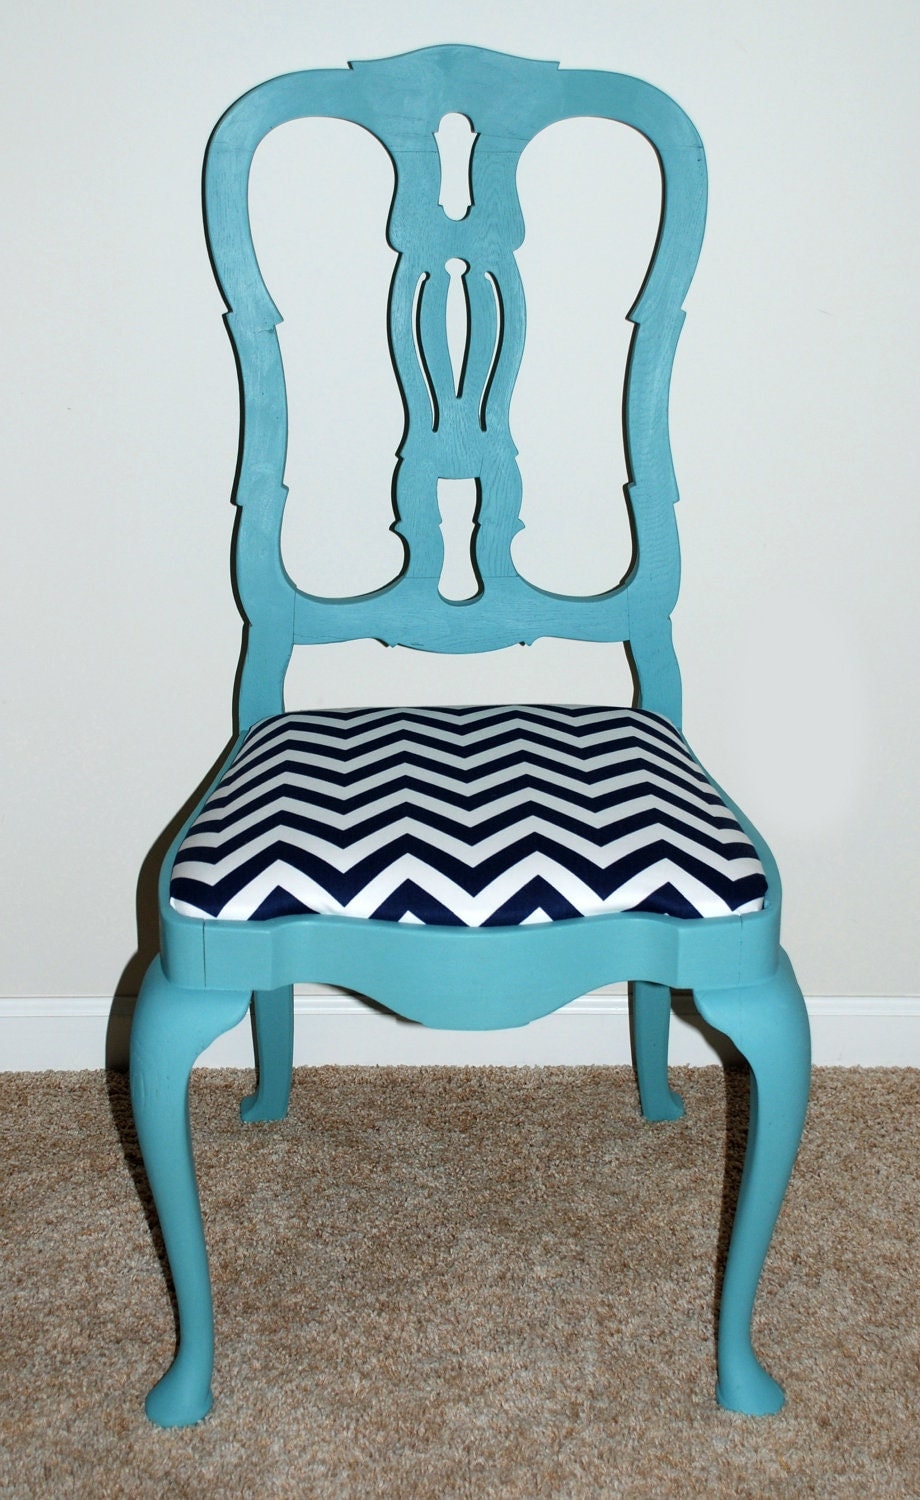 Refinished Turquoise and Chevron Print Chair by ElsAndWhistles